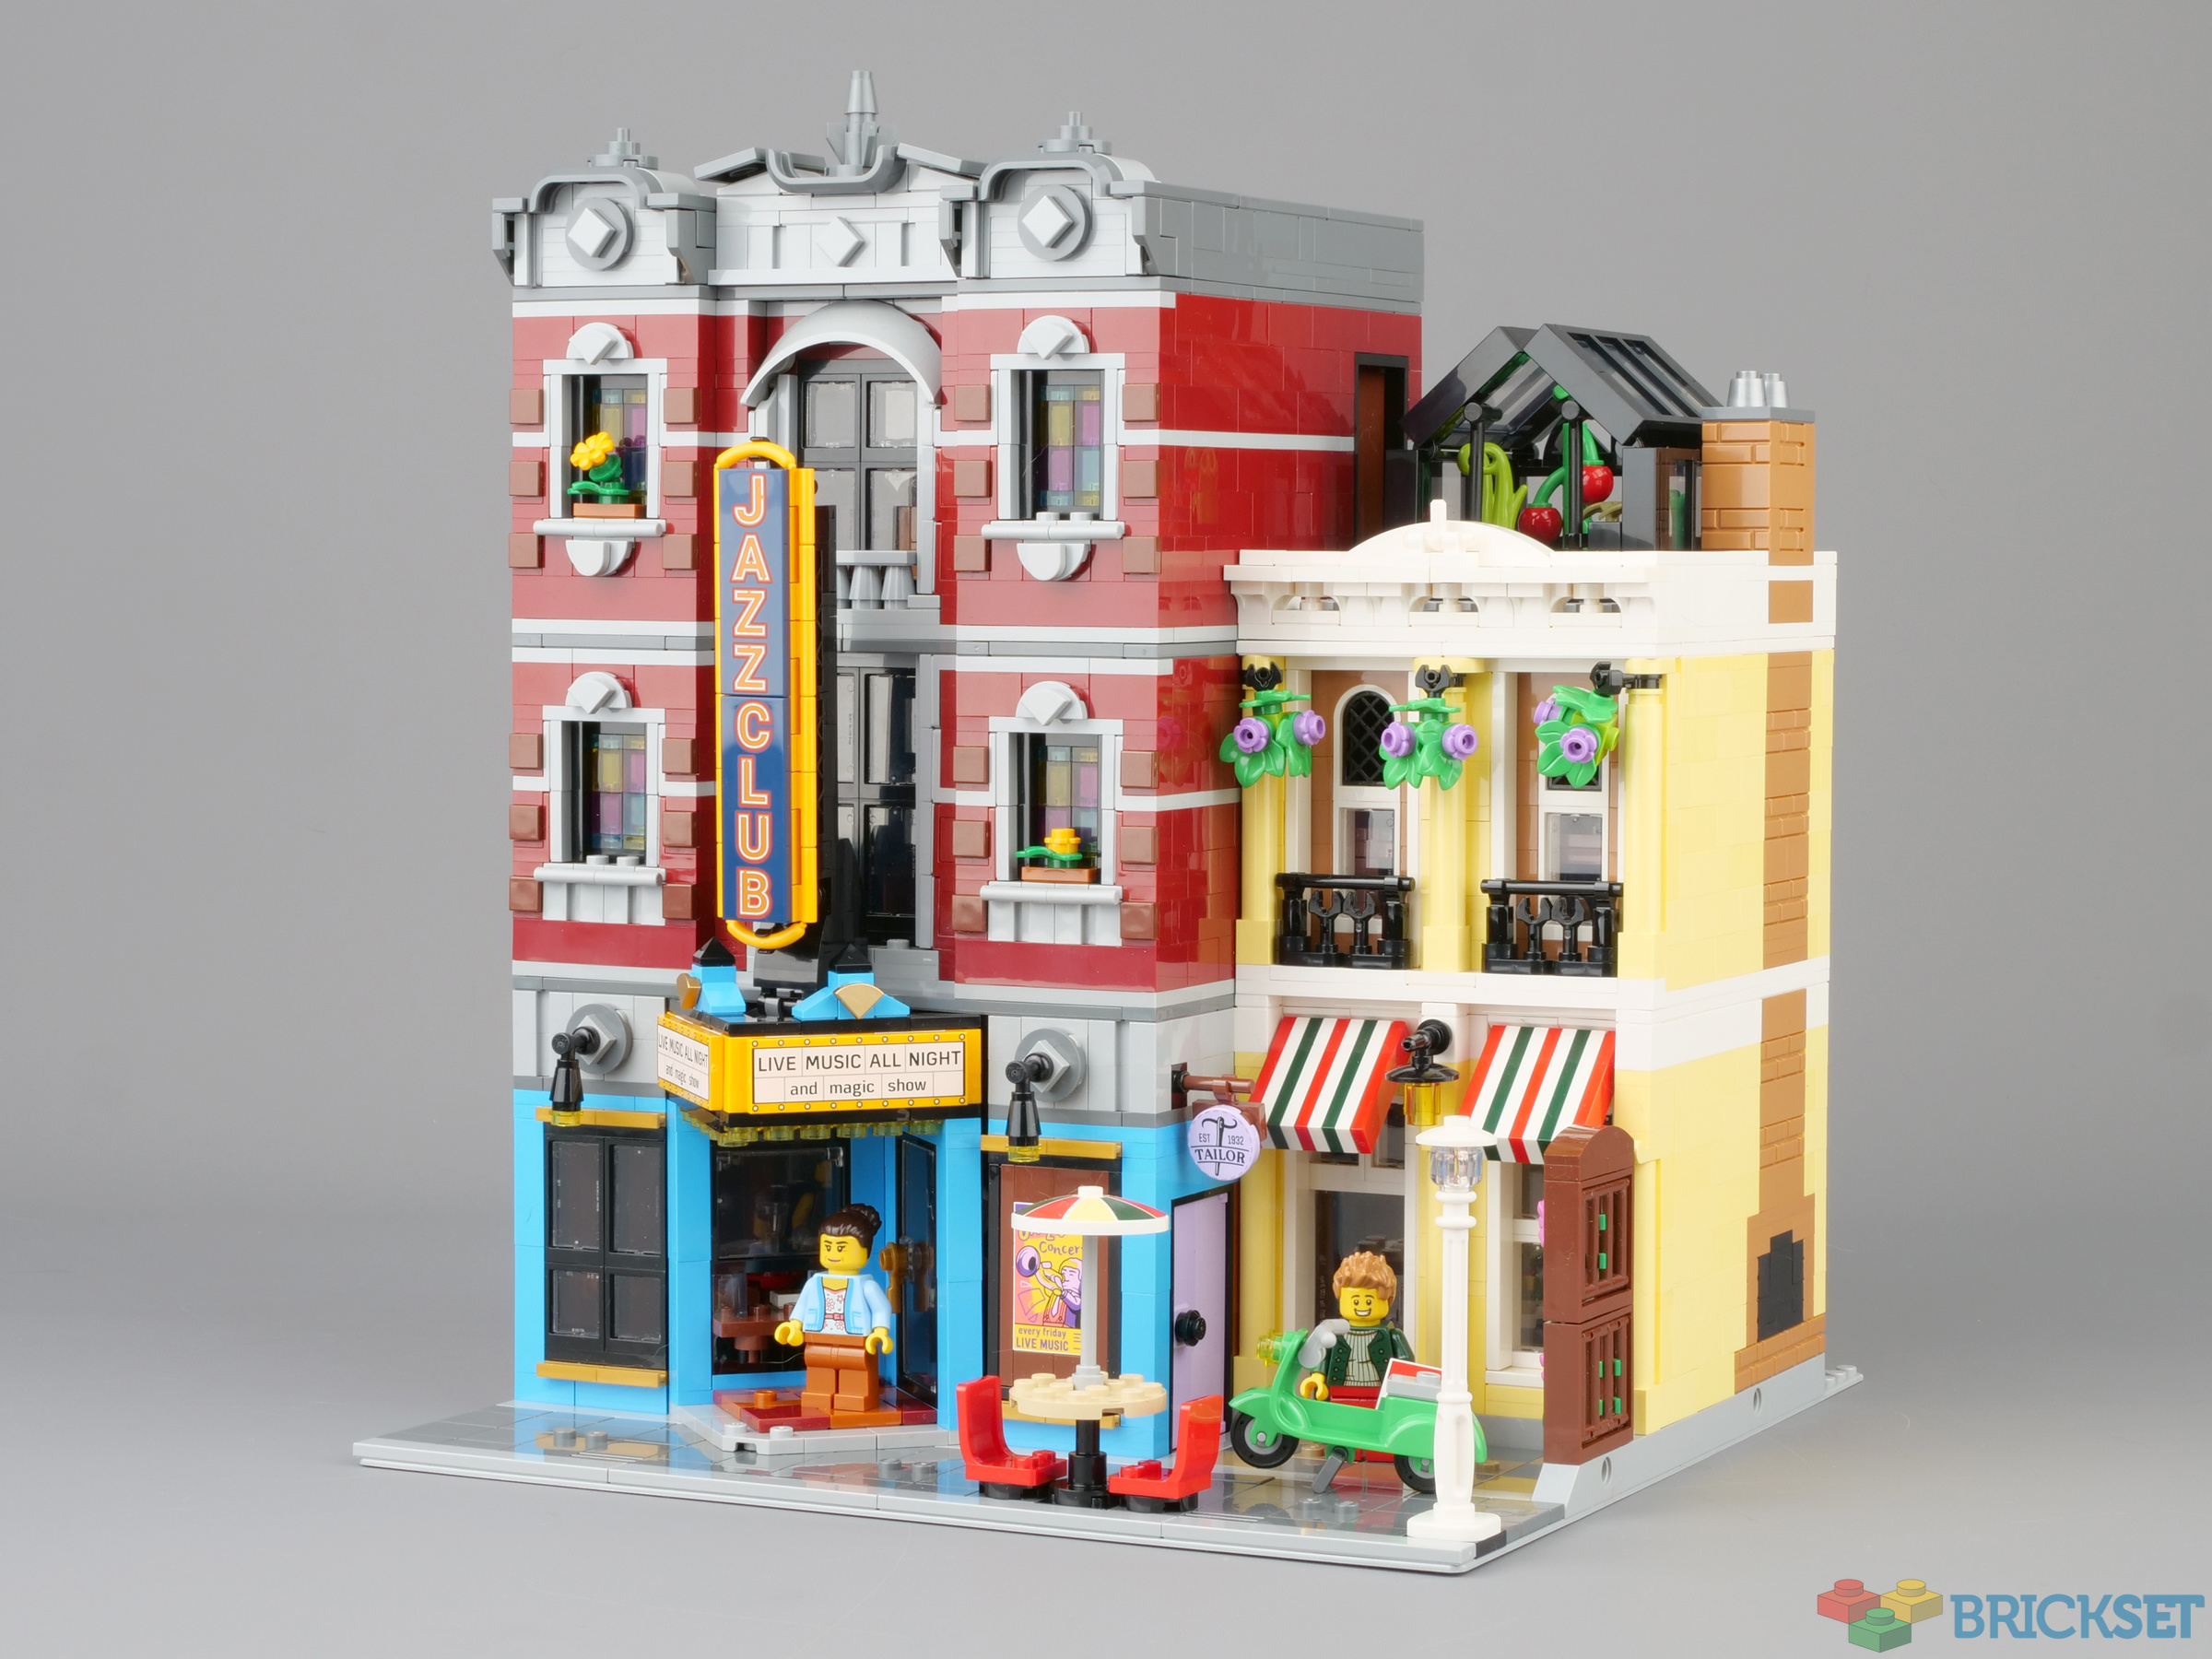 Every retiring LEGO set included in the massive John Lewis sale